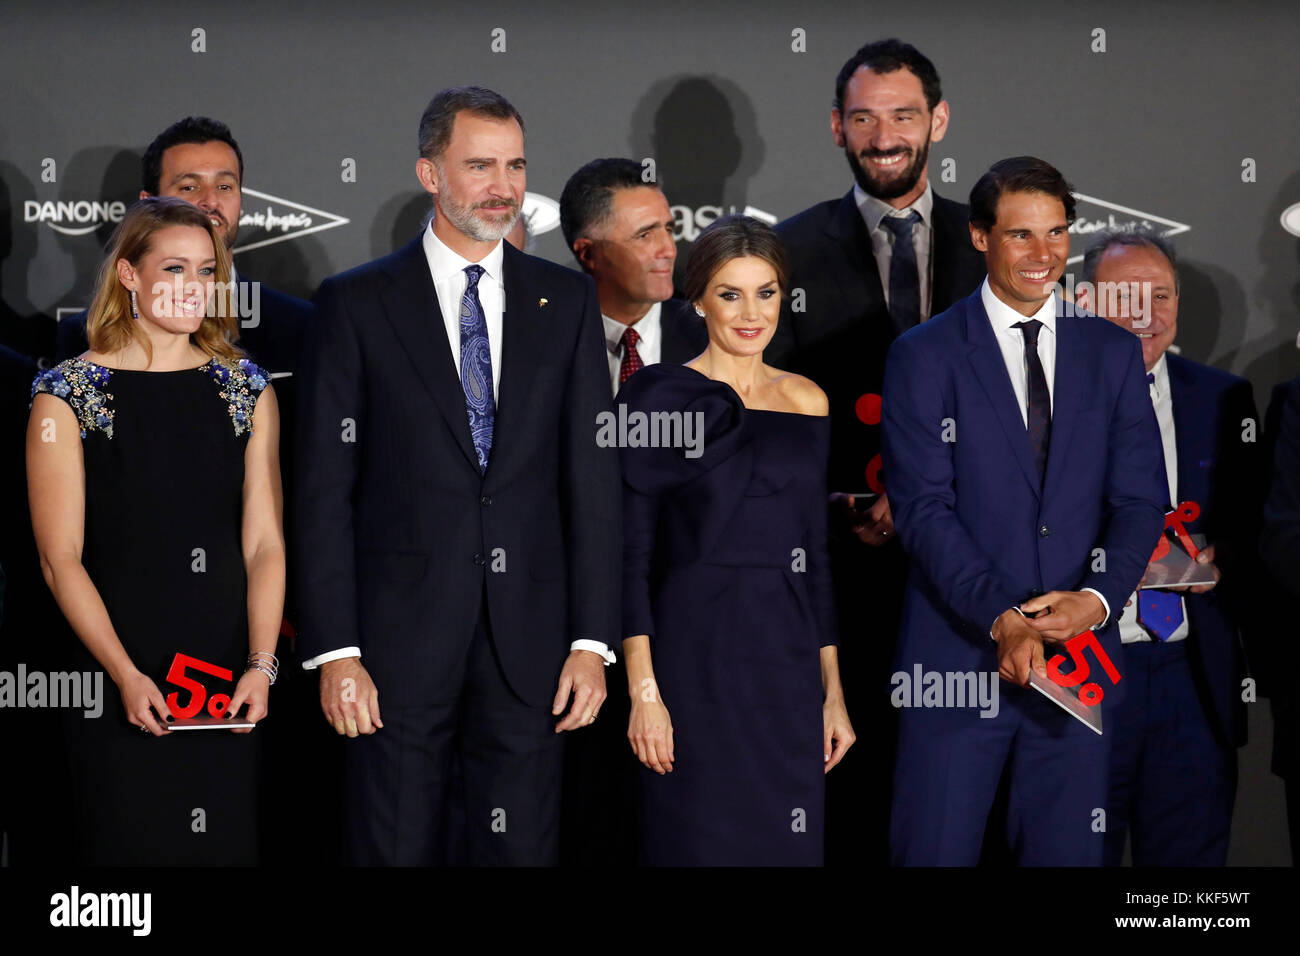 Madrid, Spain. 4th Dec, 2017. Spanish Royals King Felipe VI and Queen Letizia with Miguel Indurain, Rafa Nadal, Mireia Belmonte, Jorge Garbajosa and Sebastian Coe during the AS Sports Awards on its 50th Anniversary in Madrid on Monday 04 December 2017. Credit: Gtres Información más Comuniación on line, S.L./Alamy Live News Stock Photo